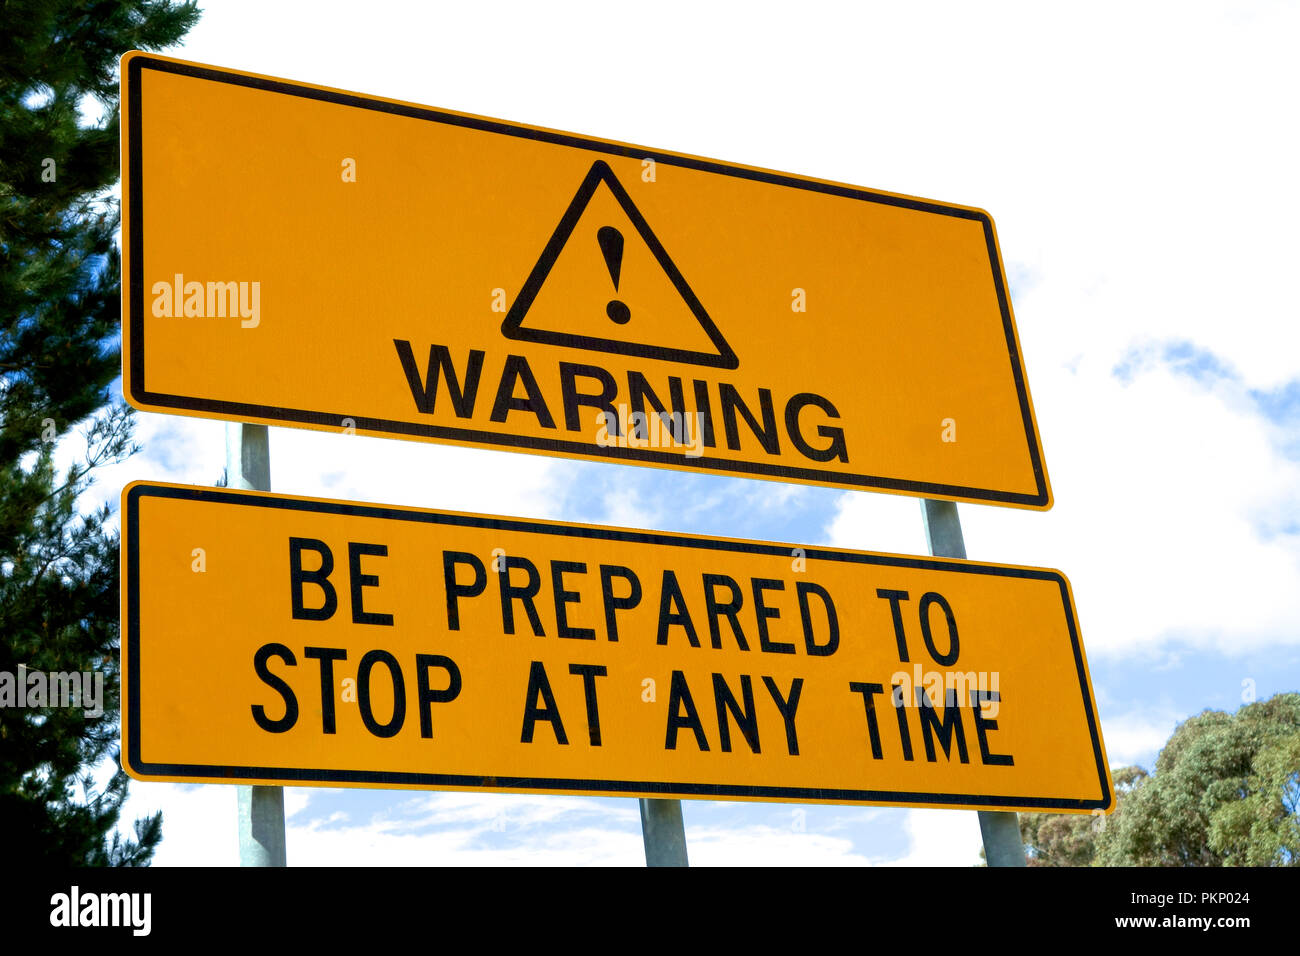 Warning: Be Prepared to Stop at Anytime signage. Stock Photo